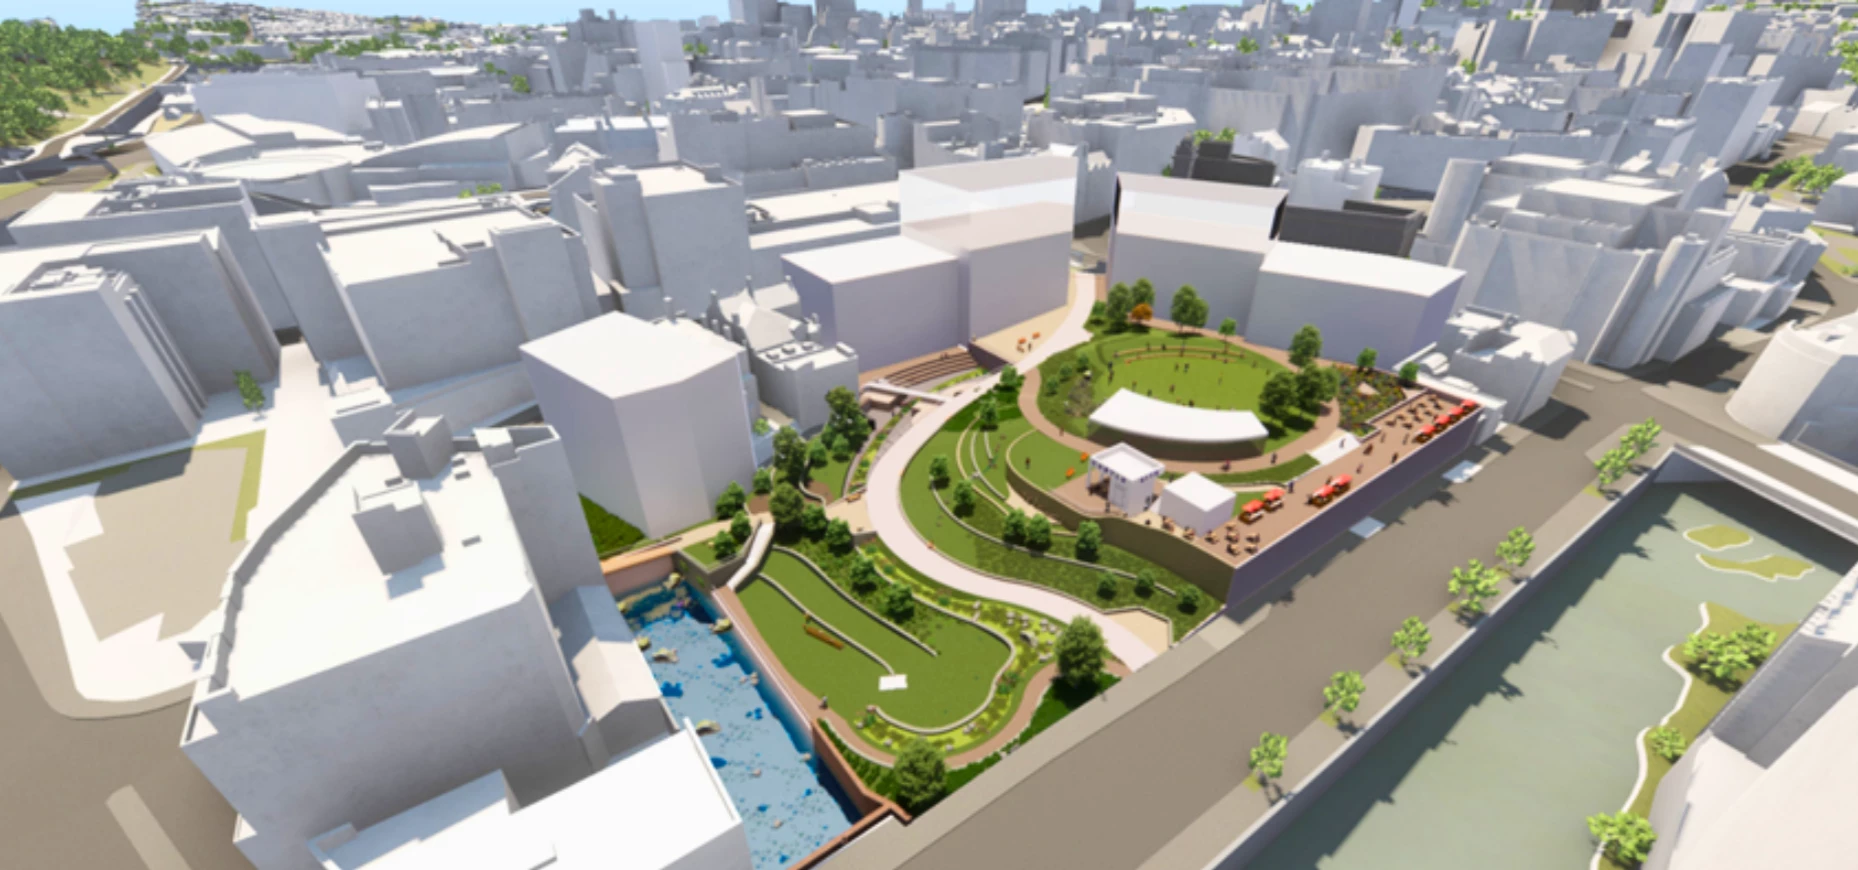 CG image of what the Castlegate regeneration project could look like.